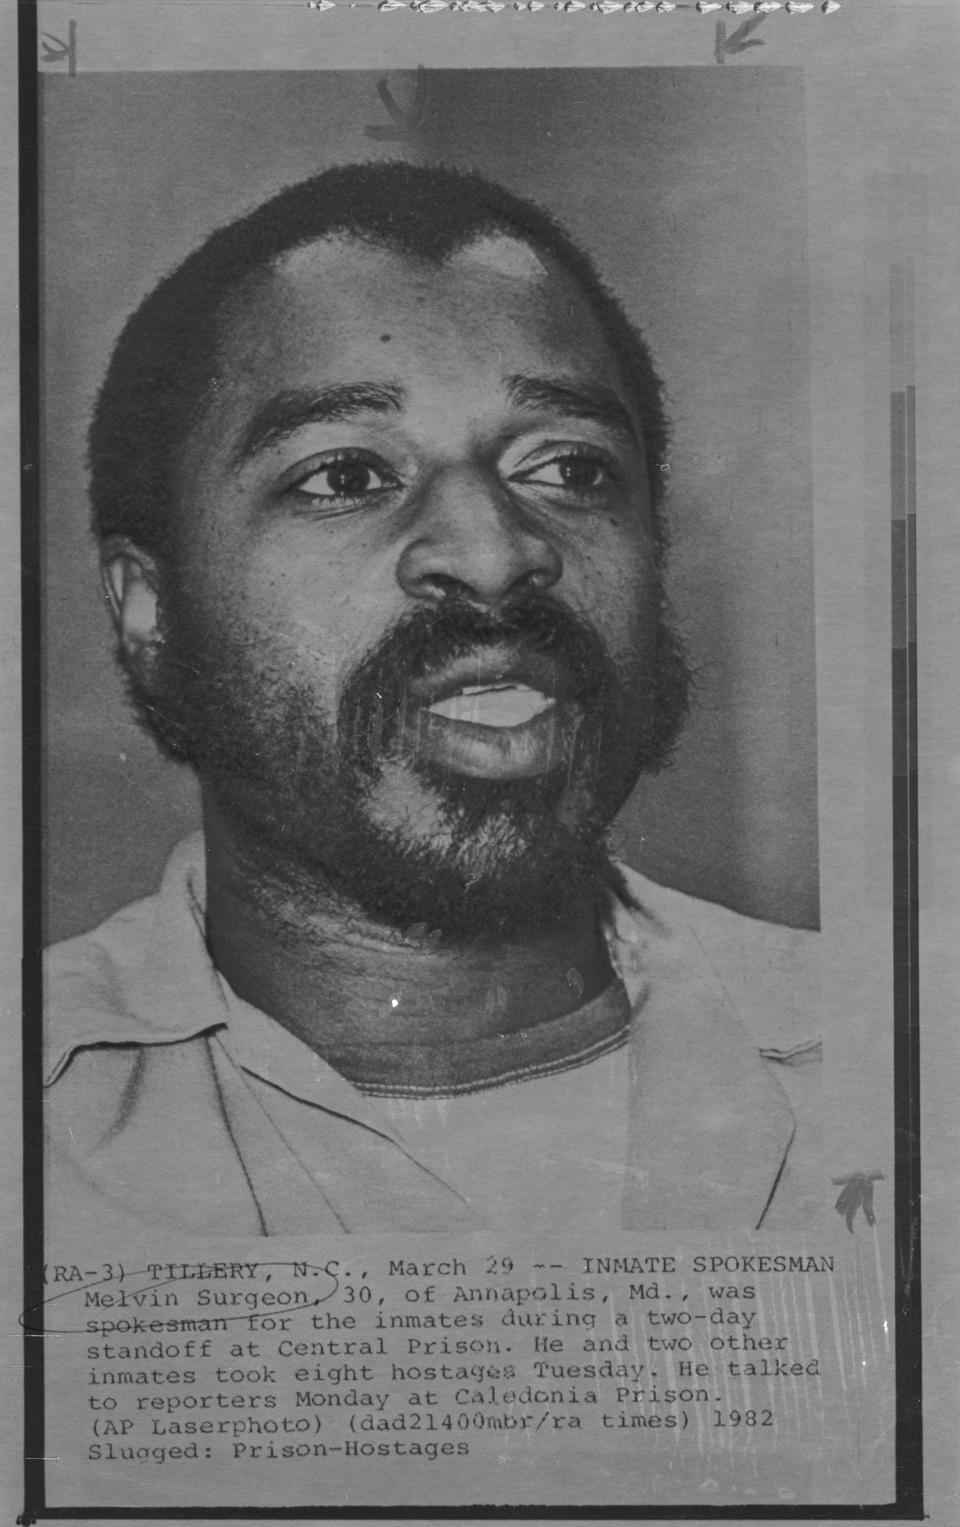 Melvin Surgeon, 30, of Annapolis, Md., was spokesman for the inmates during a two-day standoff at Central Prison. He and two other inmates took eight hostages March 24, 1982.